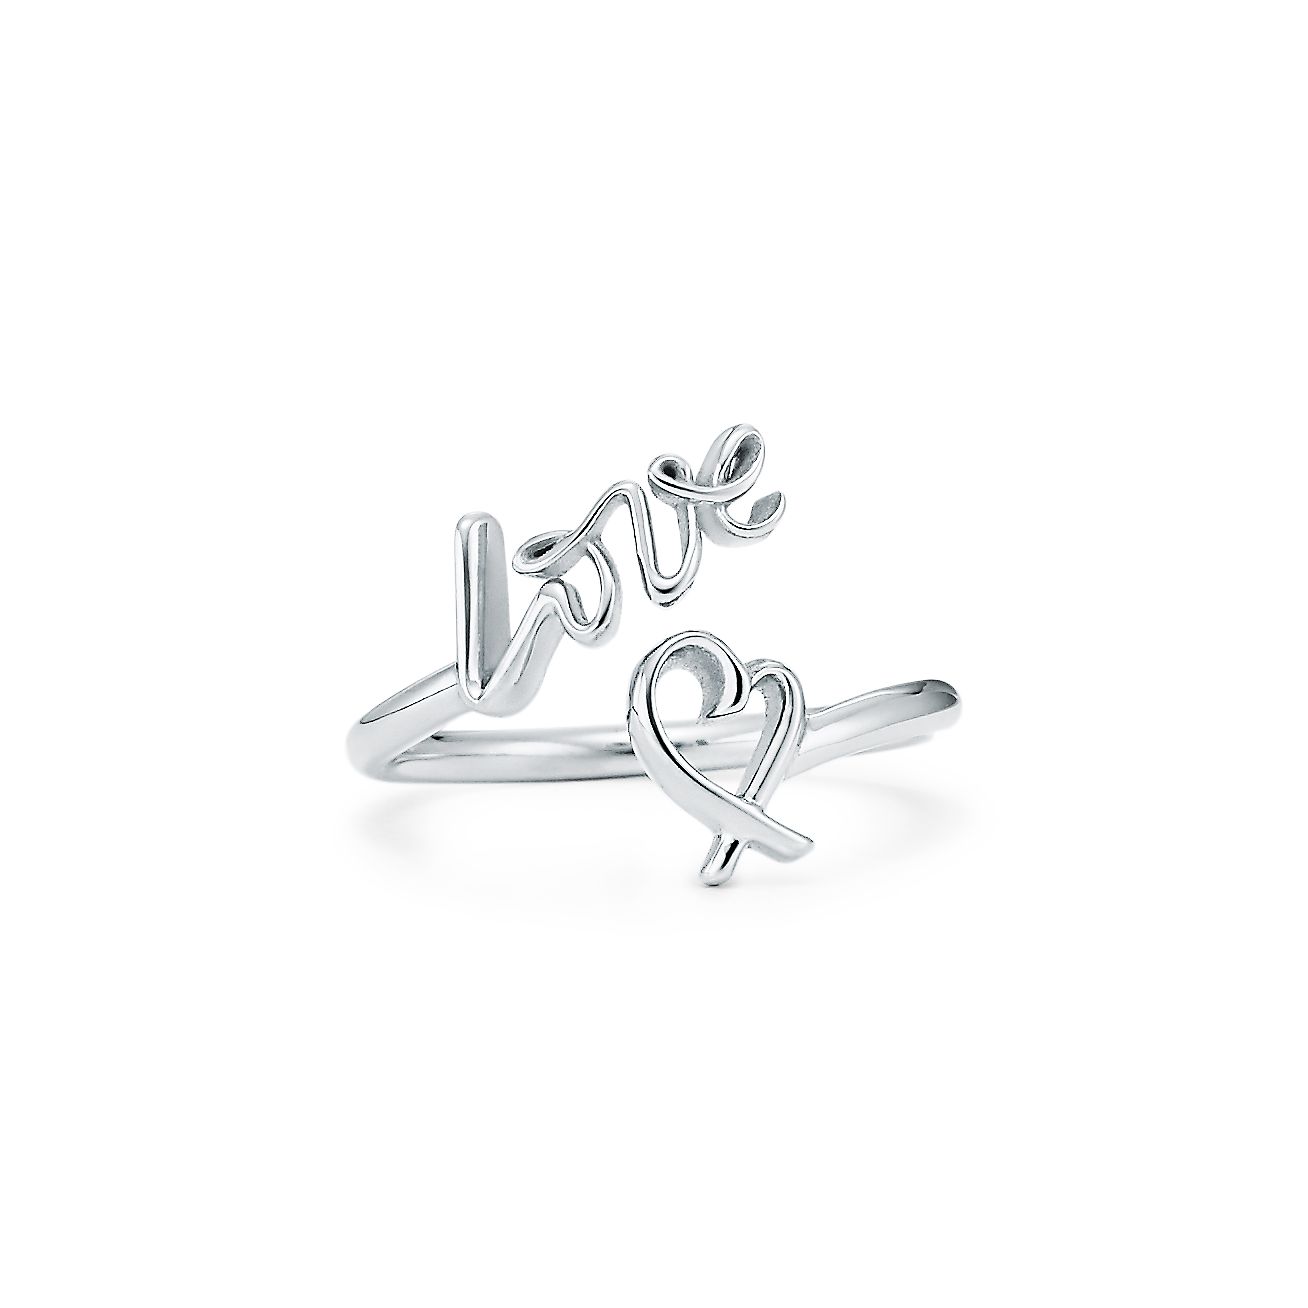 Paloma Picasso® Loving Heart ring in 